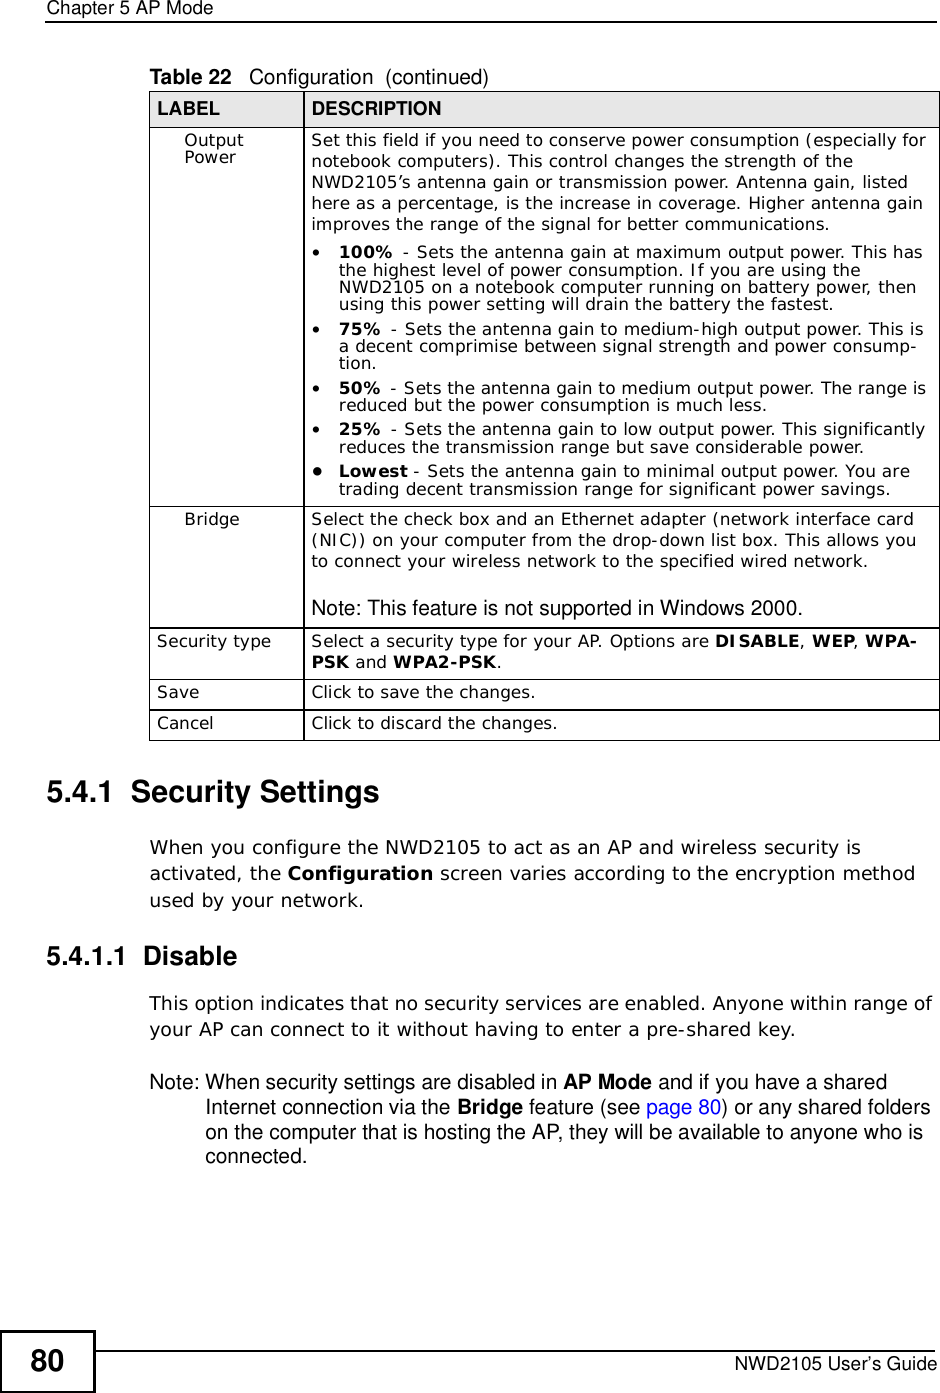 Chapter 5AP ModeNWD2105 User’s Guide805.4.1  Security Settings When you configure the NWD2105 to act as an AP and wireless security is activated, the Configuration screen varies according to the encryption method used by your network.5.4.1.1  DisableThis option indicates that no security services are enabled. Anyone within range of your AP can connect to it without having to enter a pre-shared key. Note: When security settings are disabled in AP Mode and if you have a shared Internet connection via the Bridge feature (see page80) or any shared folders on the computer that is hosting the AP, they will be available to anyone who is connected. Output Power Set this field if you need to conserve power consumption (especially for notebook computers). This control changes the strength of the NWD2105’s antenna gain or transmission power. Antenna gain, listed here as a percentage, is the increase in coverage. Higher antenna gain improves the range of the signal for better communications.•100% - Sets the antenna gain at maximum output power. This has the highest level of power consumption. If you are using the NWD2105 on a notebook computer running on battery power, then using this power setting will drain the battery the fastest.•75% - Sets the antenna gain to medium-high output power. This is a decent comprimise between signal strength and power consump-tion.•50% - Sets the antenna gain to medium output power. The range is reduced but the power consumption is much less.•25% - Sets the antenna gain to low output power. This significantly reduces the transmission range but save considerable power.•Lowest - Sets the antenna gain to minimal output power. You are trading decent transmission range for significant power savings.Bridge Select the check box and an Ethernet adapter (network interface card (NIC)) on your computer from the drop-down list box. This allows you to connect your wireless network to the specified wired network.Note: This feature is not supported in Windows 2000.Security typeSelect a security type for your AP. Options are DISABLE,WEP,WPA-PSK and WPA2-PSK.SaveClickto save the changes.CancelClickto discard the changes.Table 22   Configuration  (continued)LABEL DESCRIPTION